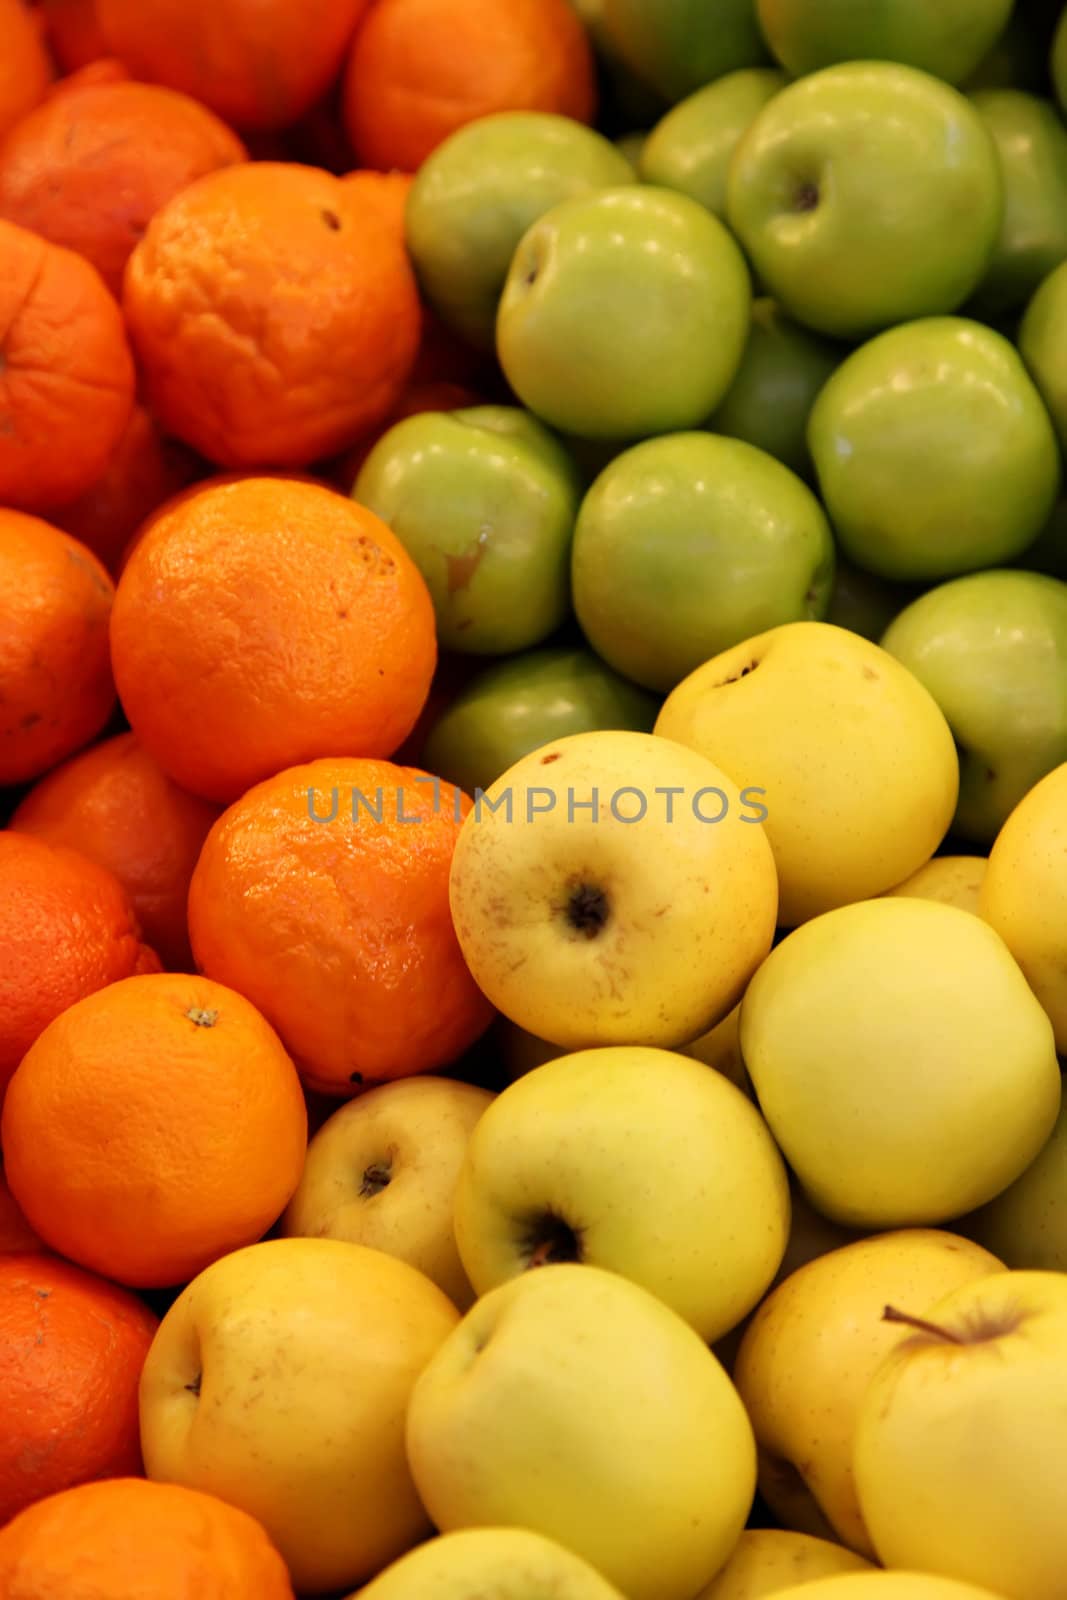 Apples and Oranges Fruits on Grocery Store